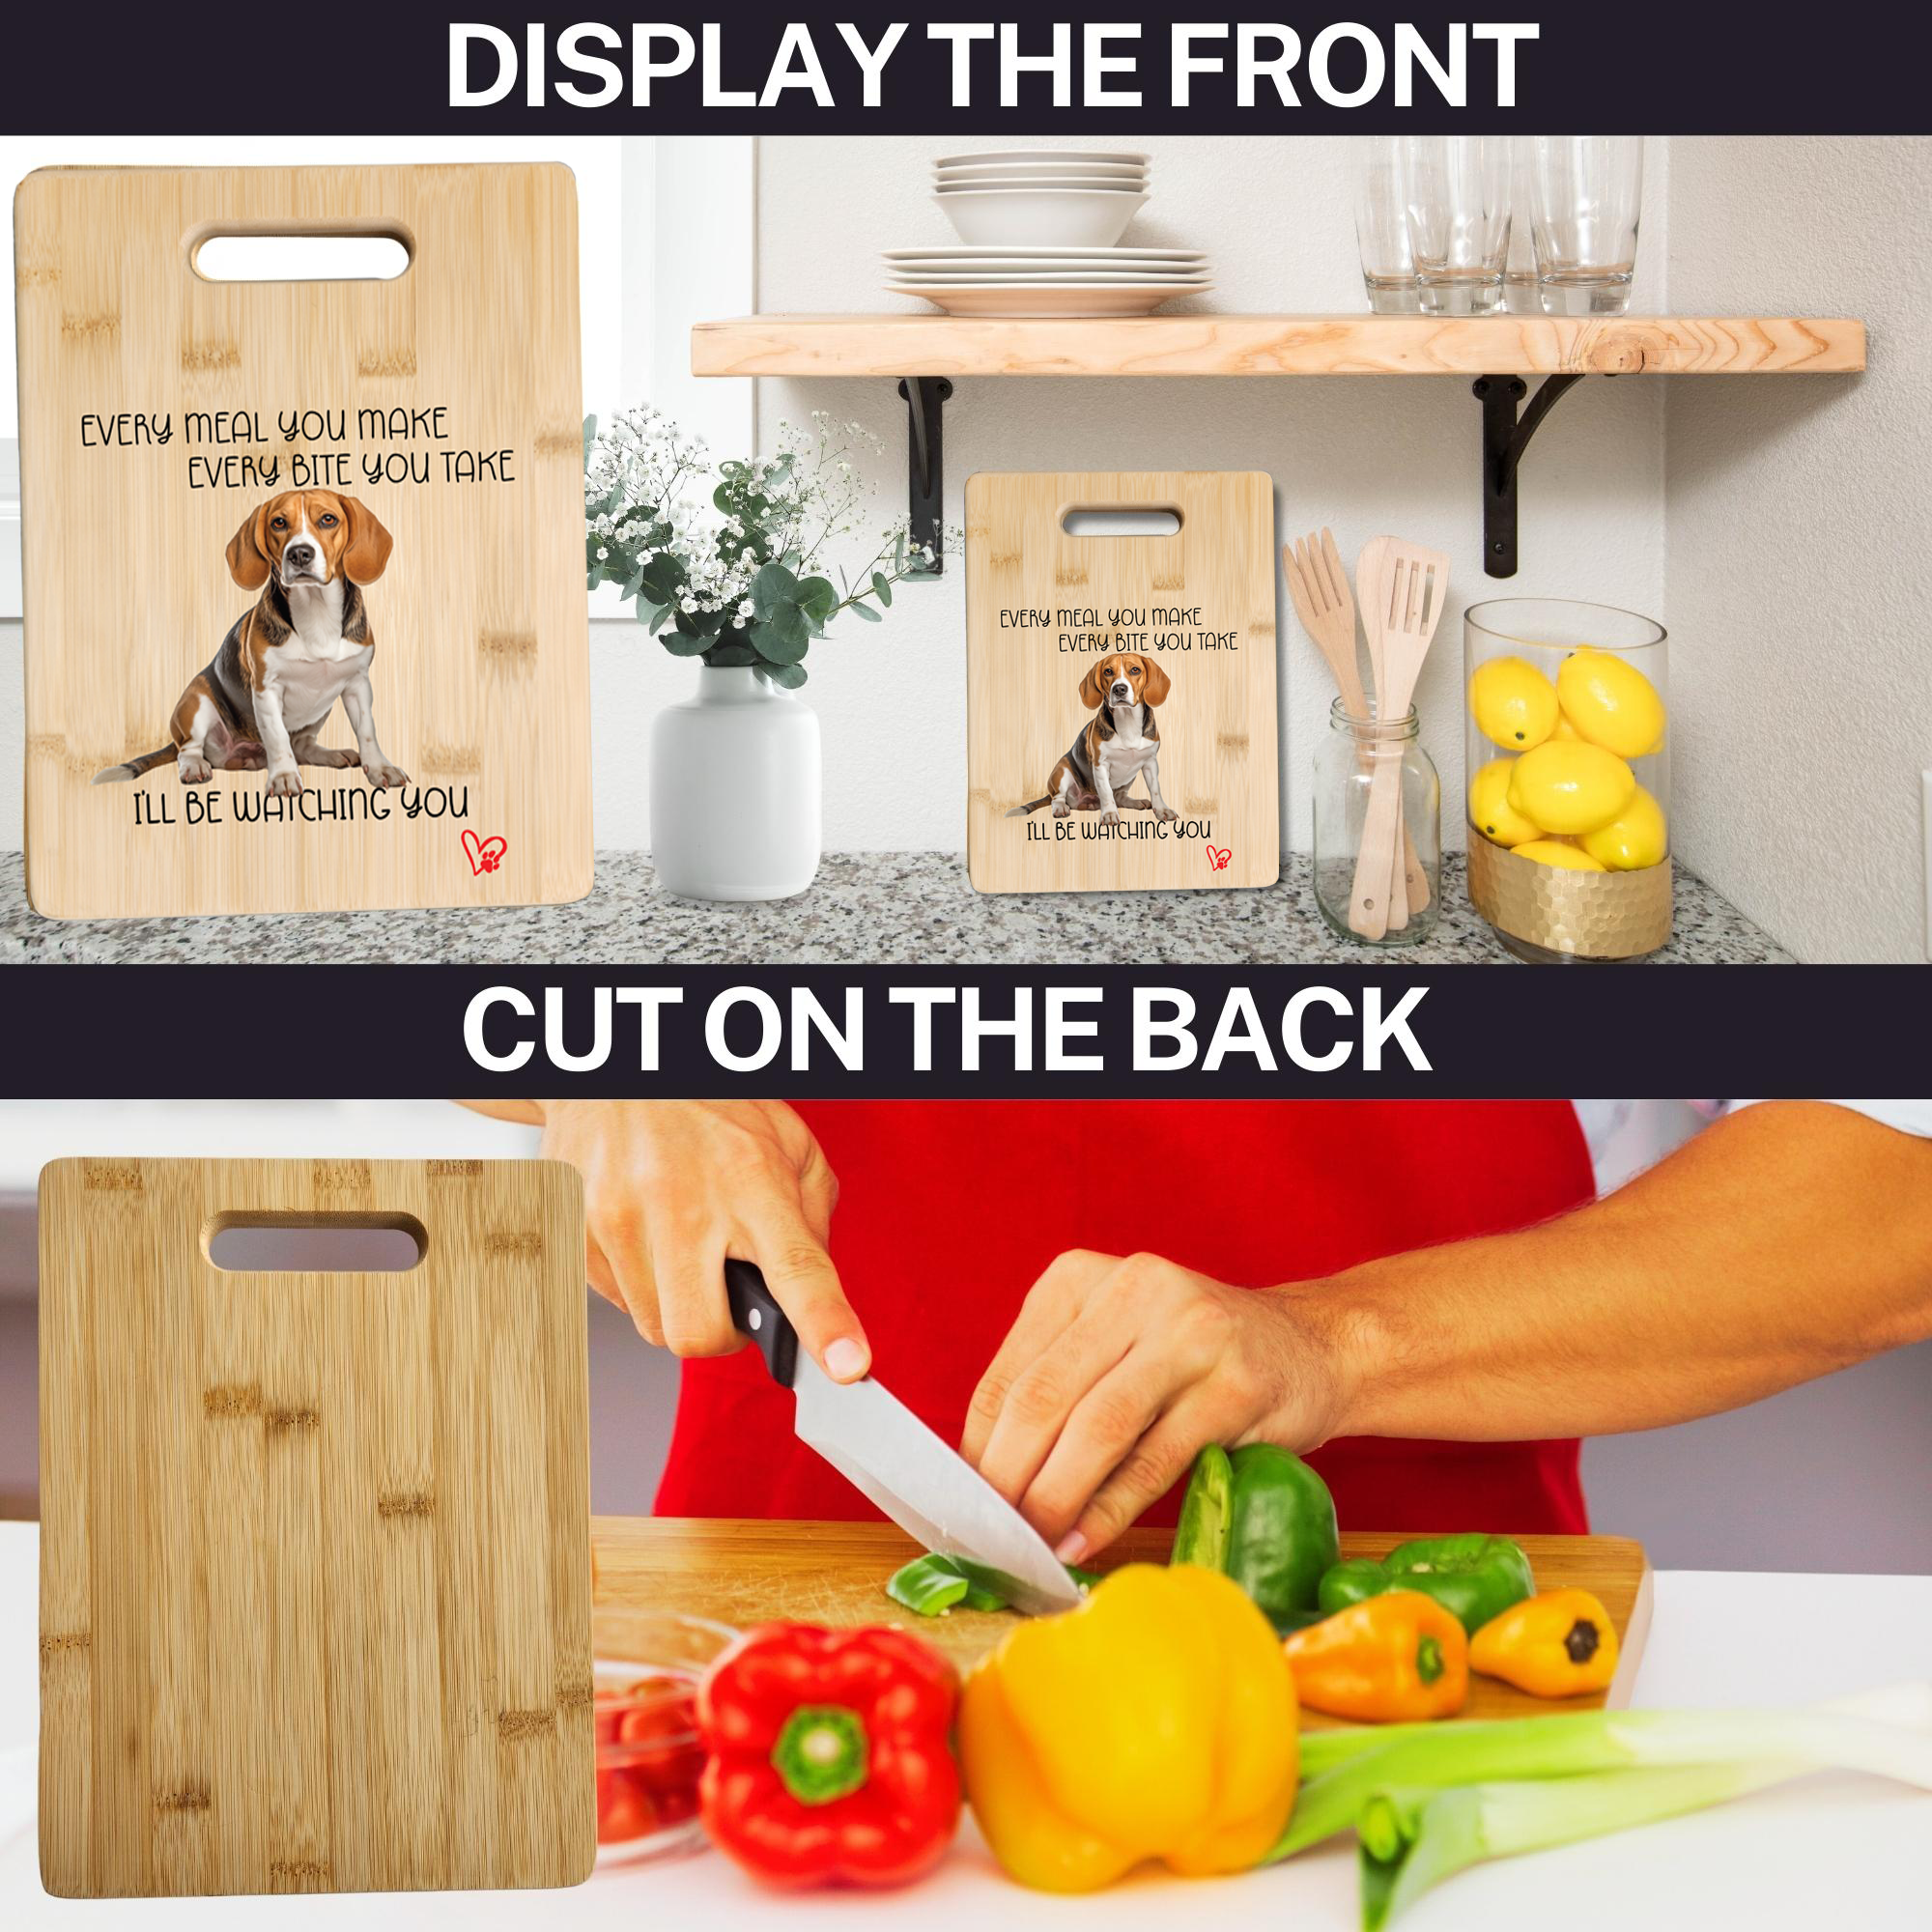 Beagle Cutting Board and Ten Large Digitally Printed Beagle Stickers, Beagle Gift for Beagle Lovers,